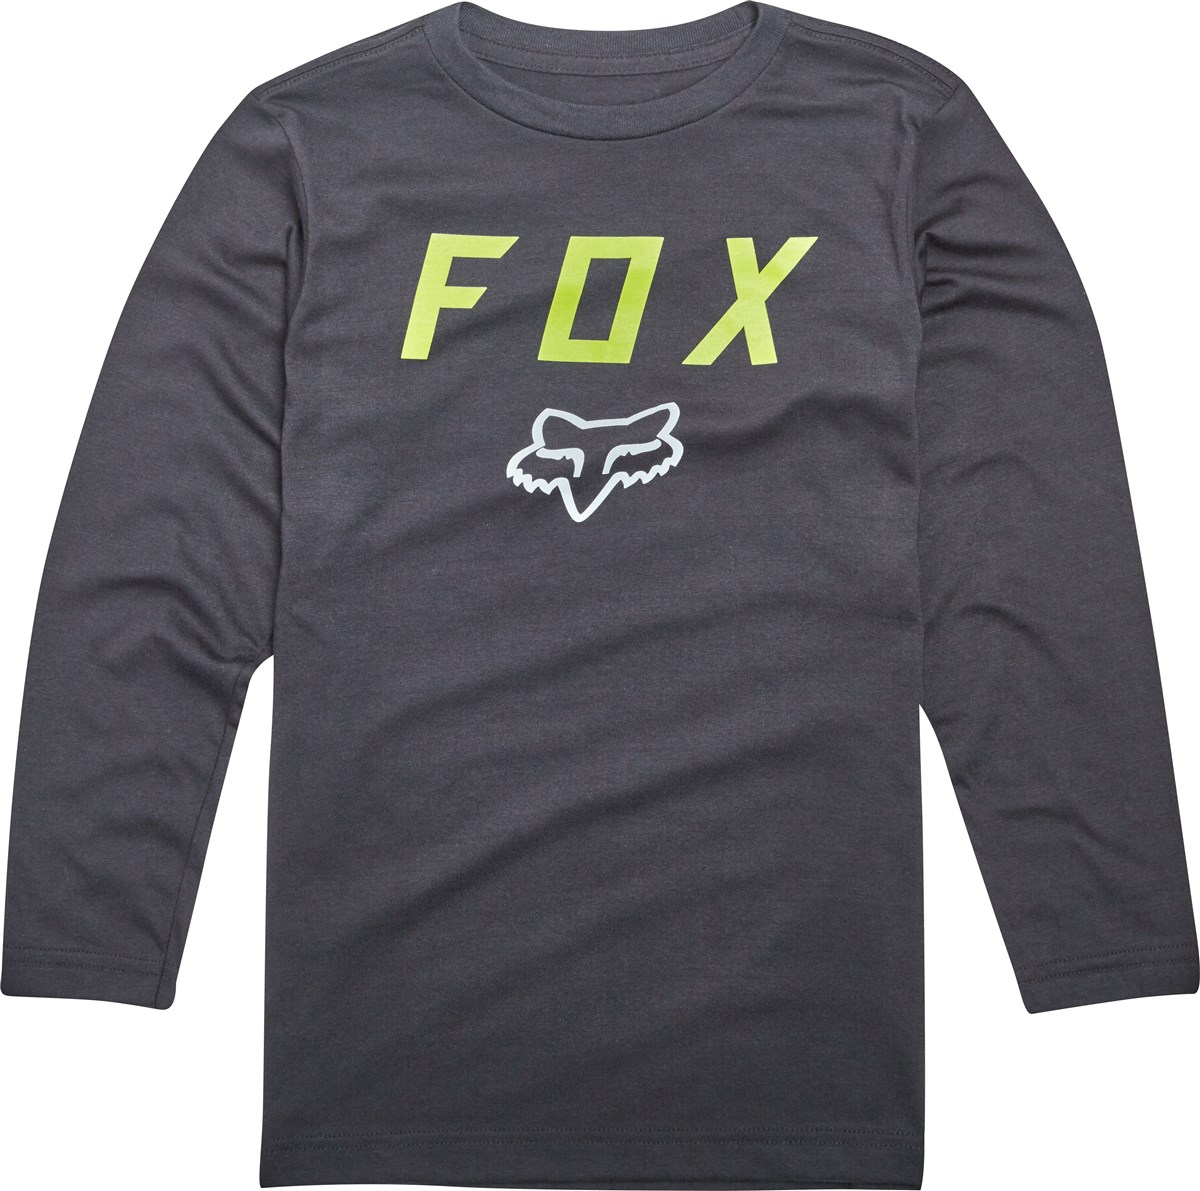 Fox Clothing Dusty Trails Youth Long Sleeve Tee AW17 product image